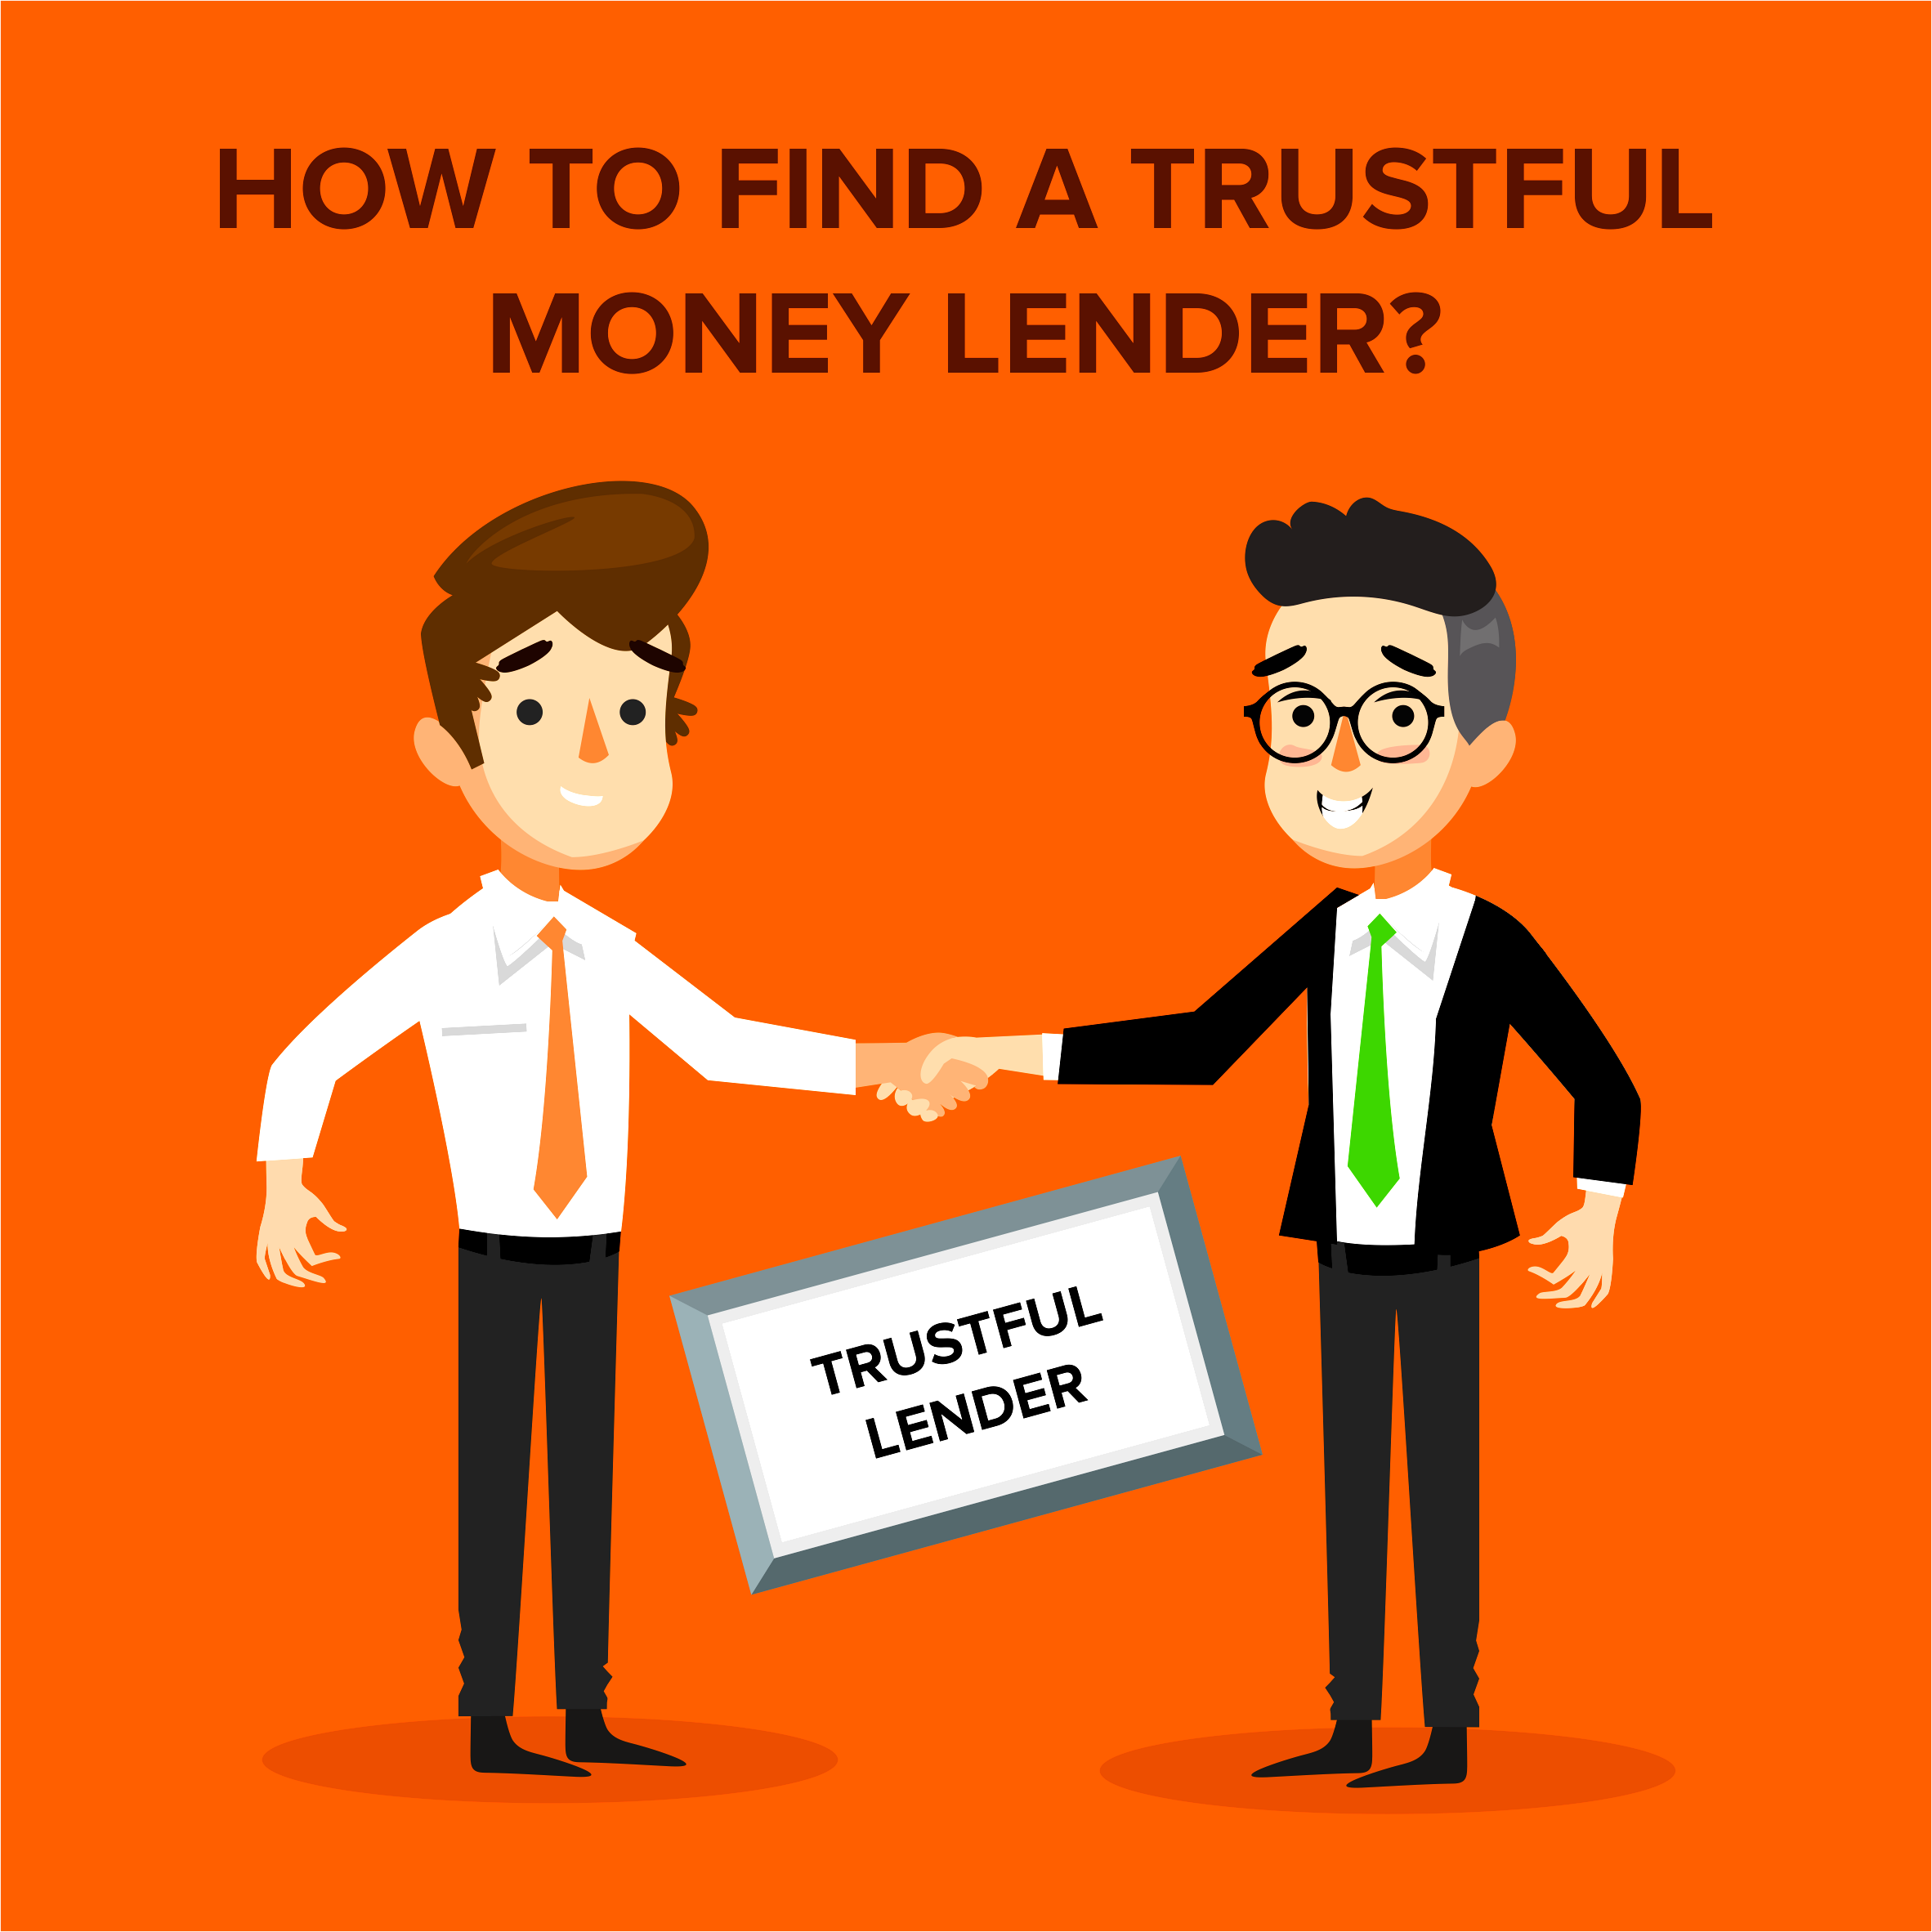 How to Find a Trustful Money Lender?